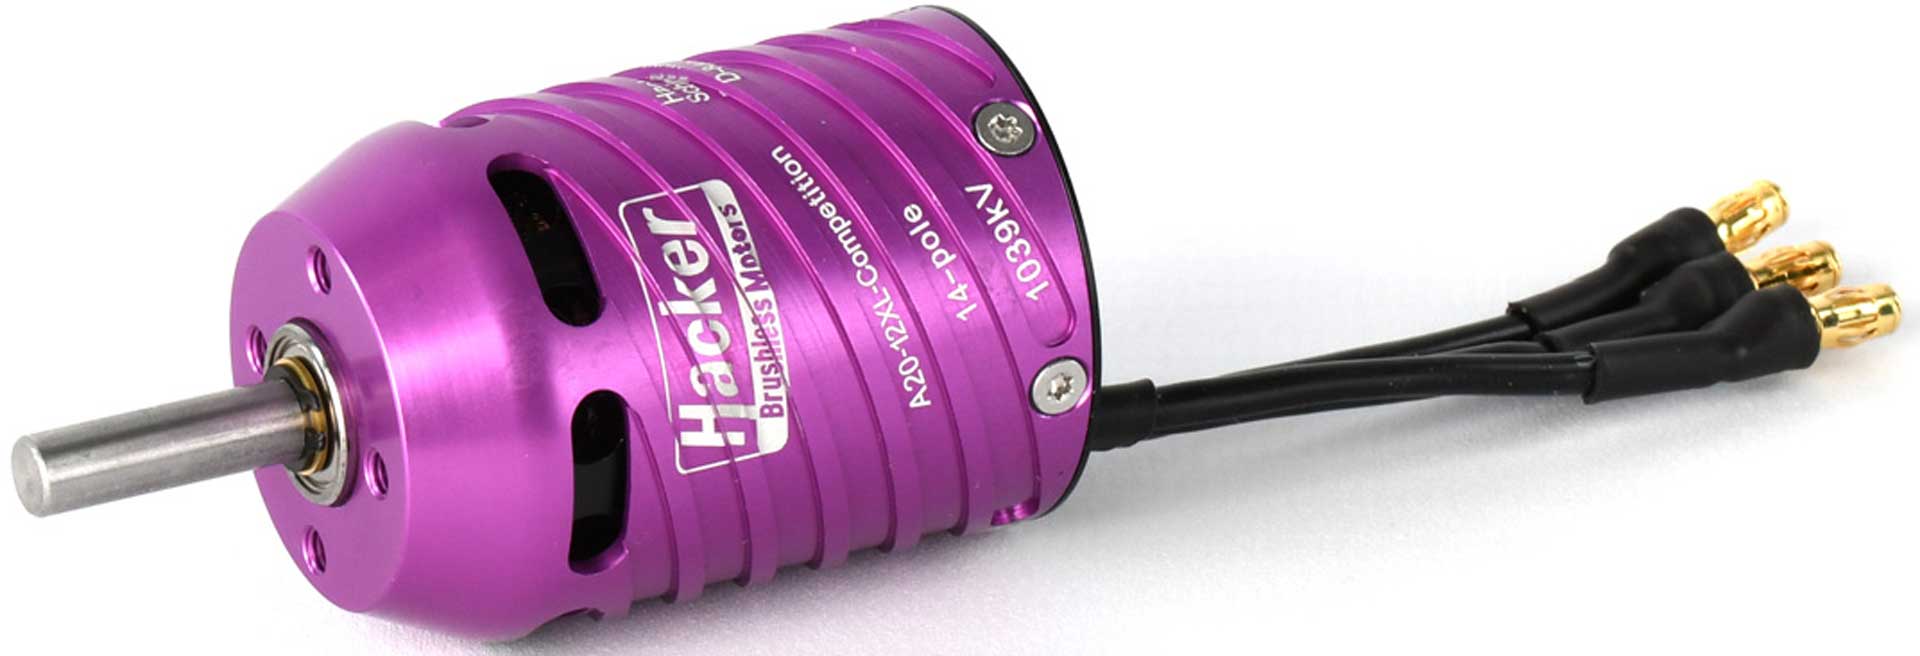 HACKER A20-12 XL Competition kv1039 Brushless Motor